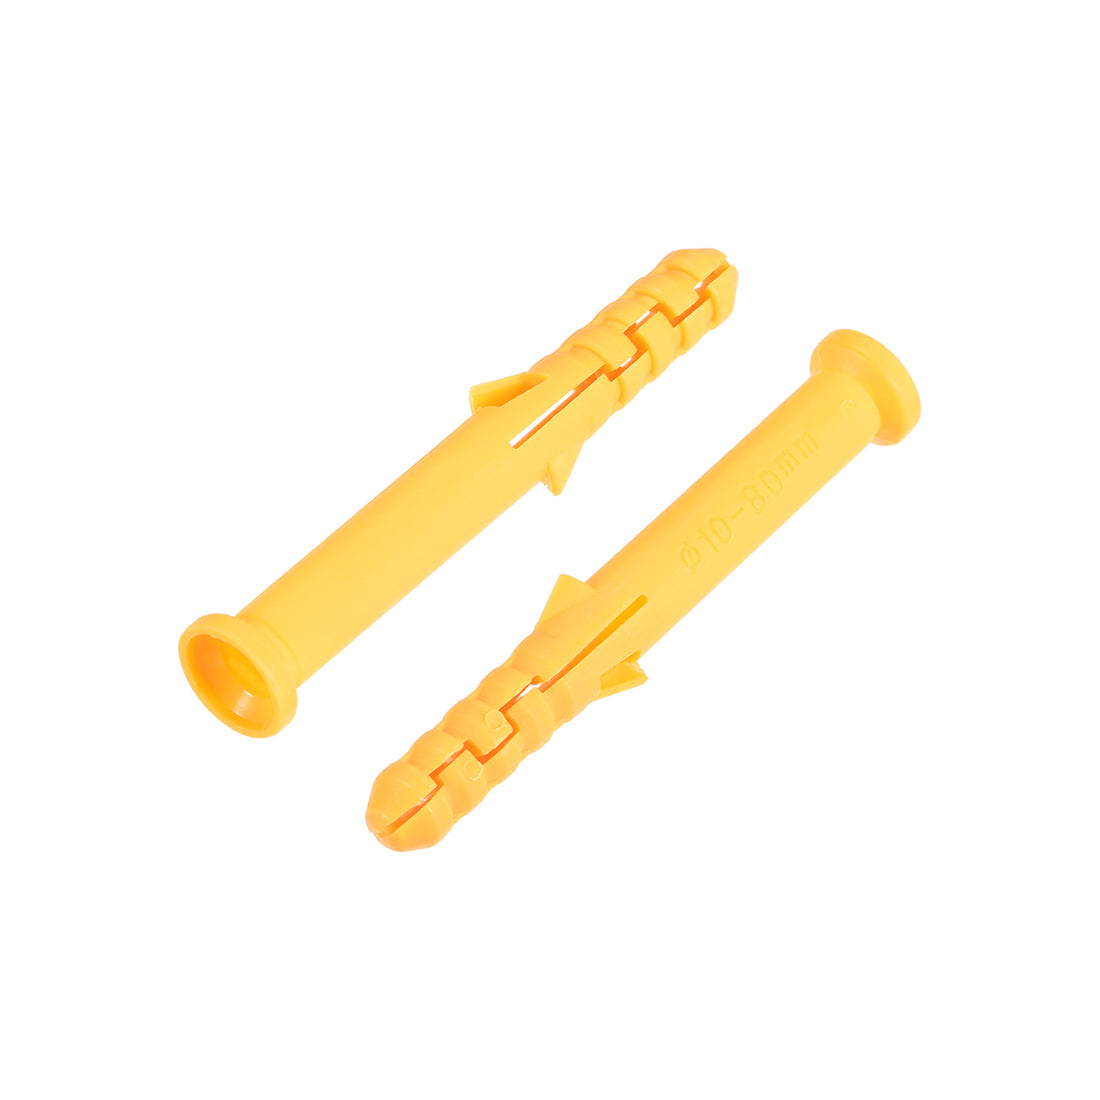 uxcell Uxcell 10x80mm Plastic Expansion Tube Bolts Column Frame Fixings Yellow 20pcs